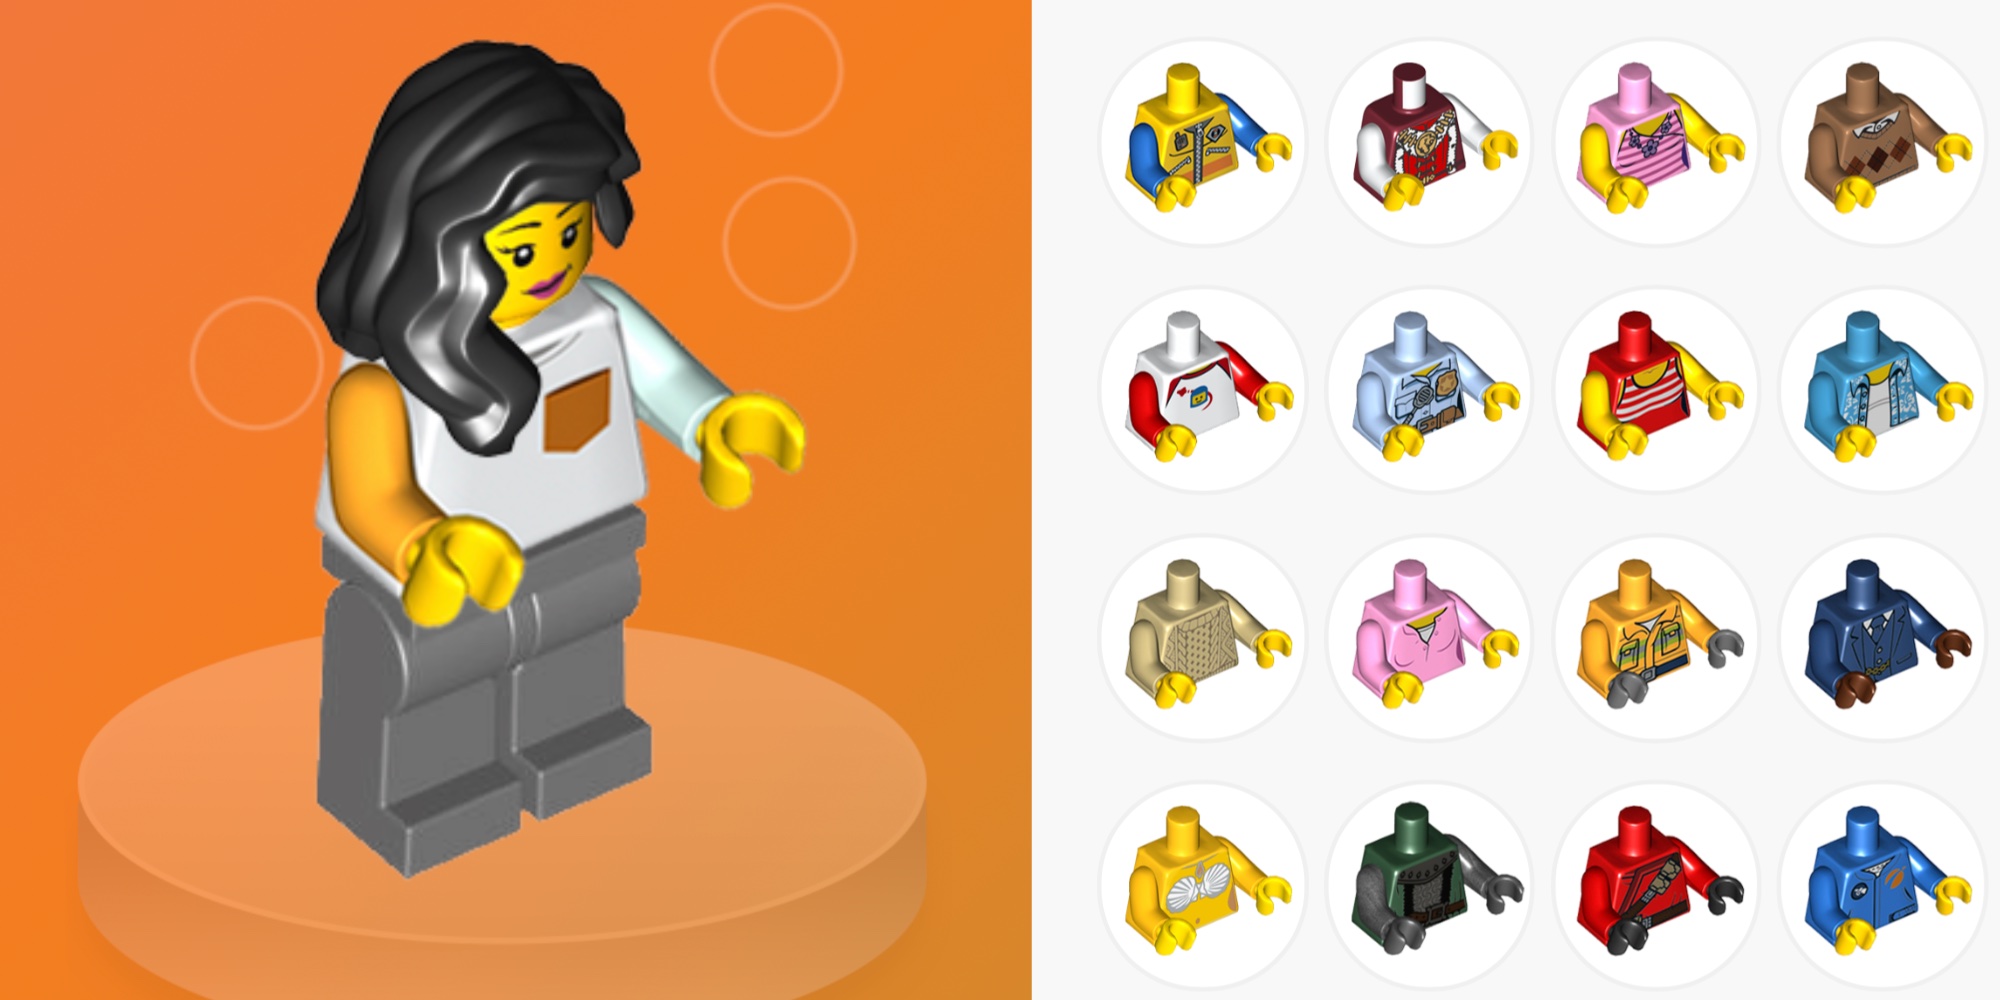 Profet Ung Mutton LEGO Build a Minifigure online beta launches - 9to5Toys